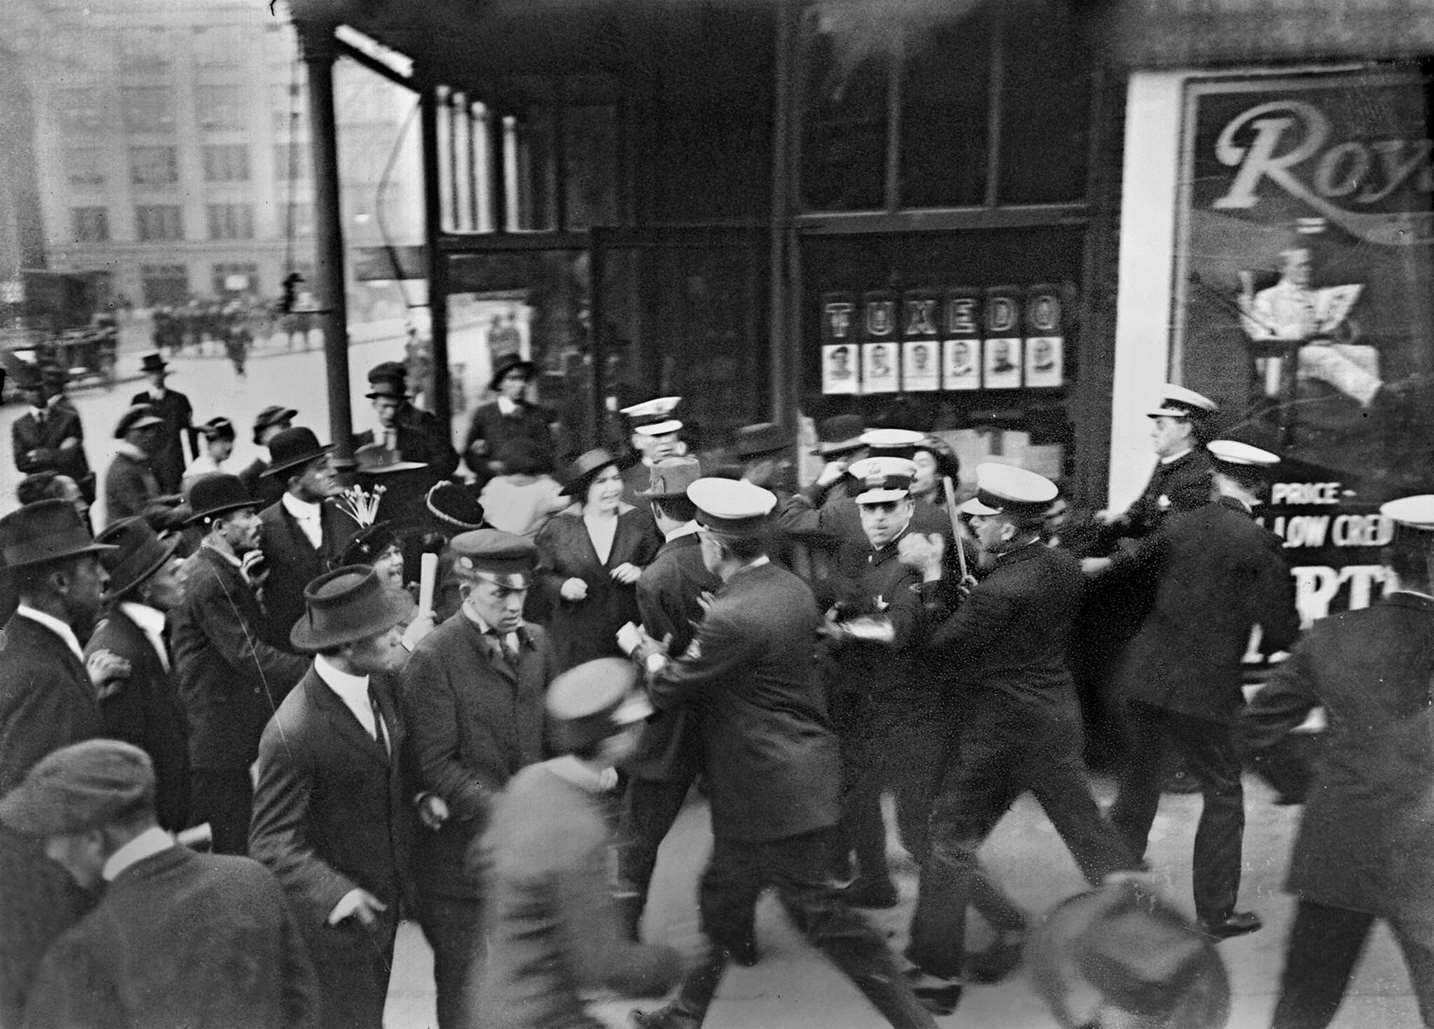 Striking garment workers and policemen scuffle in Chicago, Illinois, 1915.